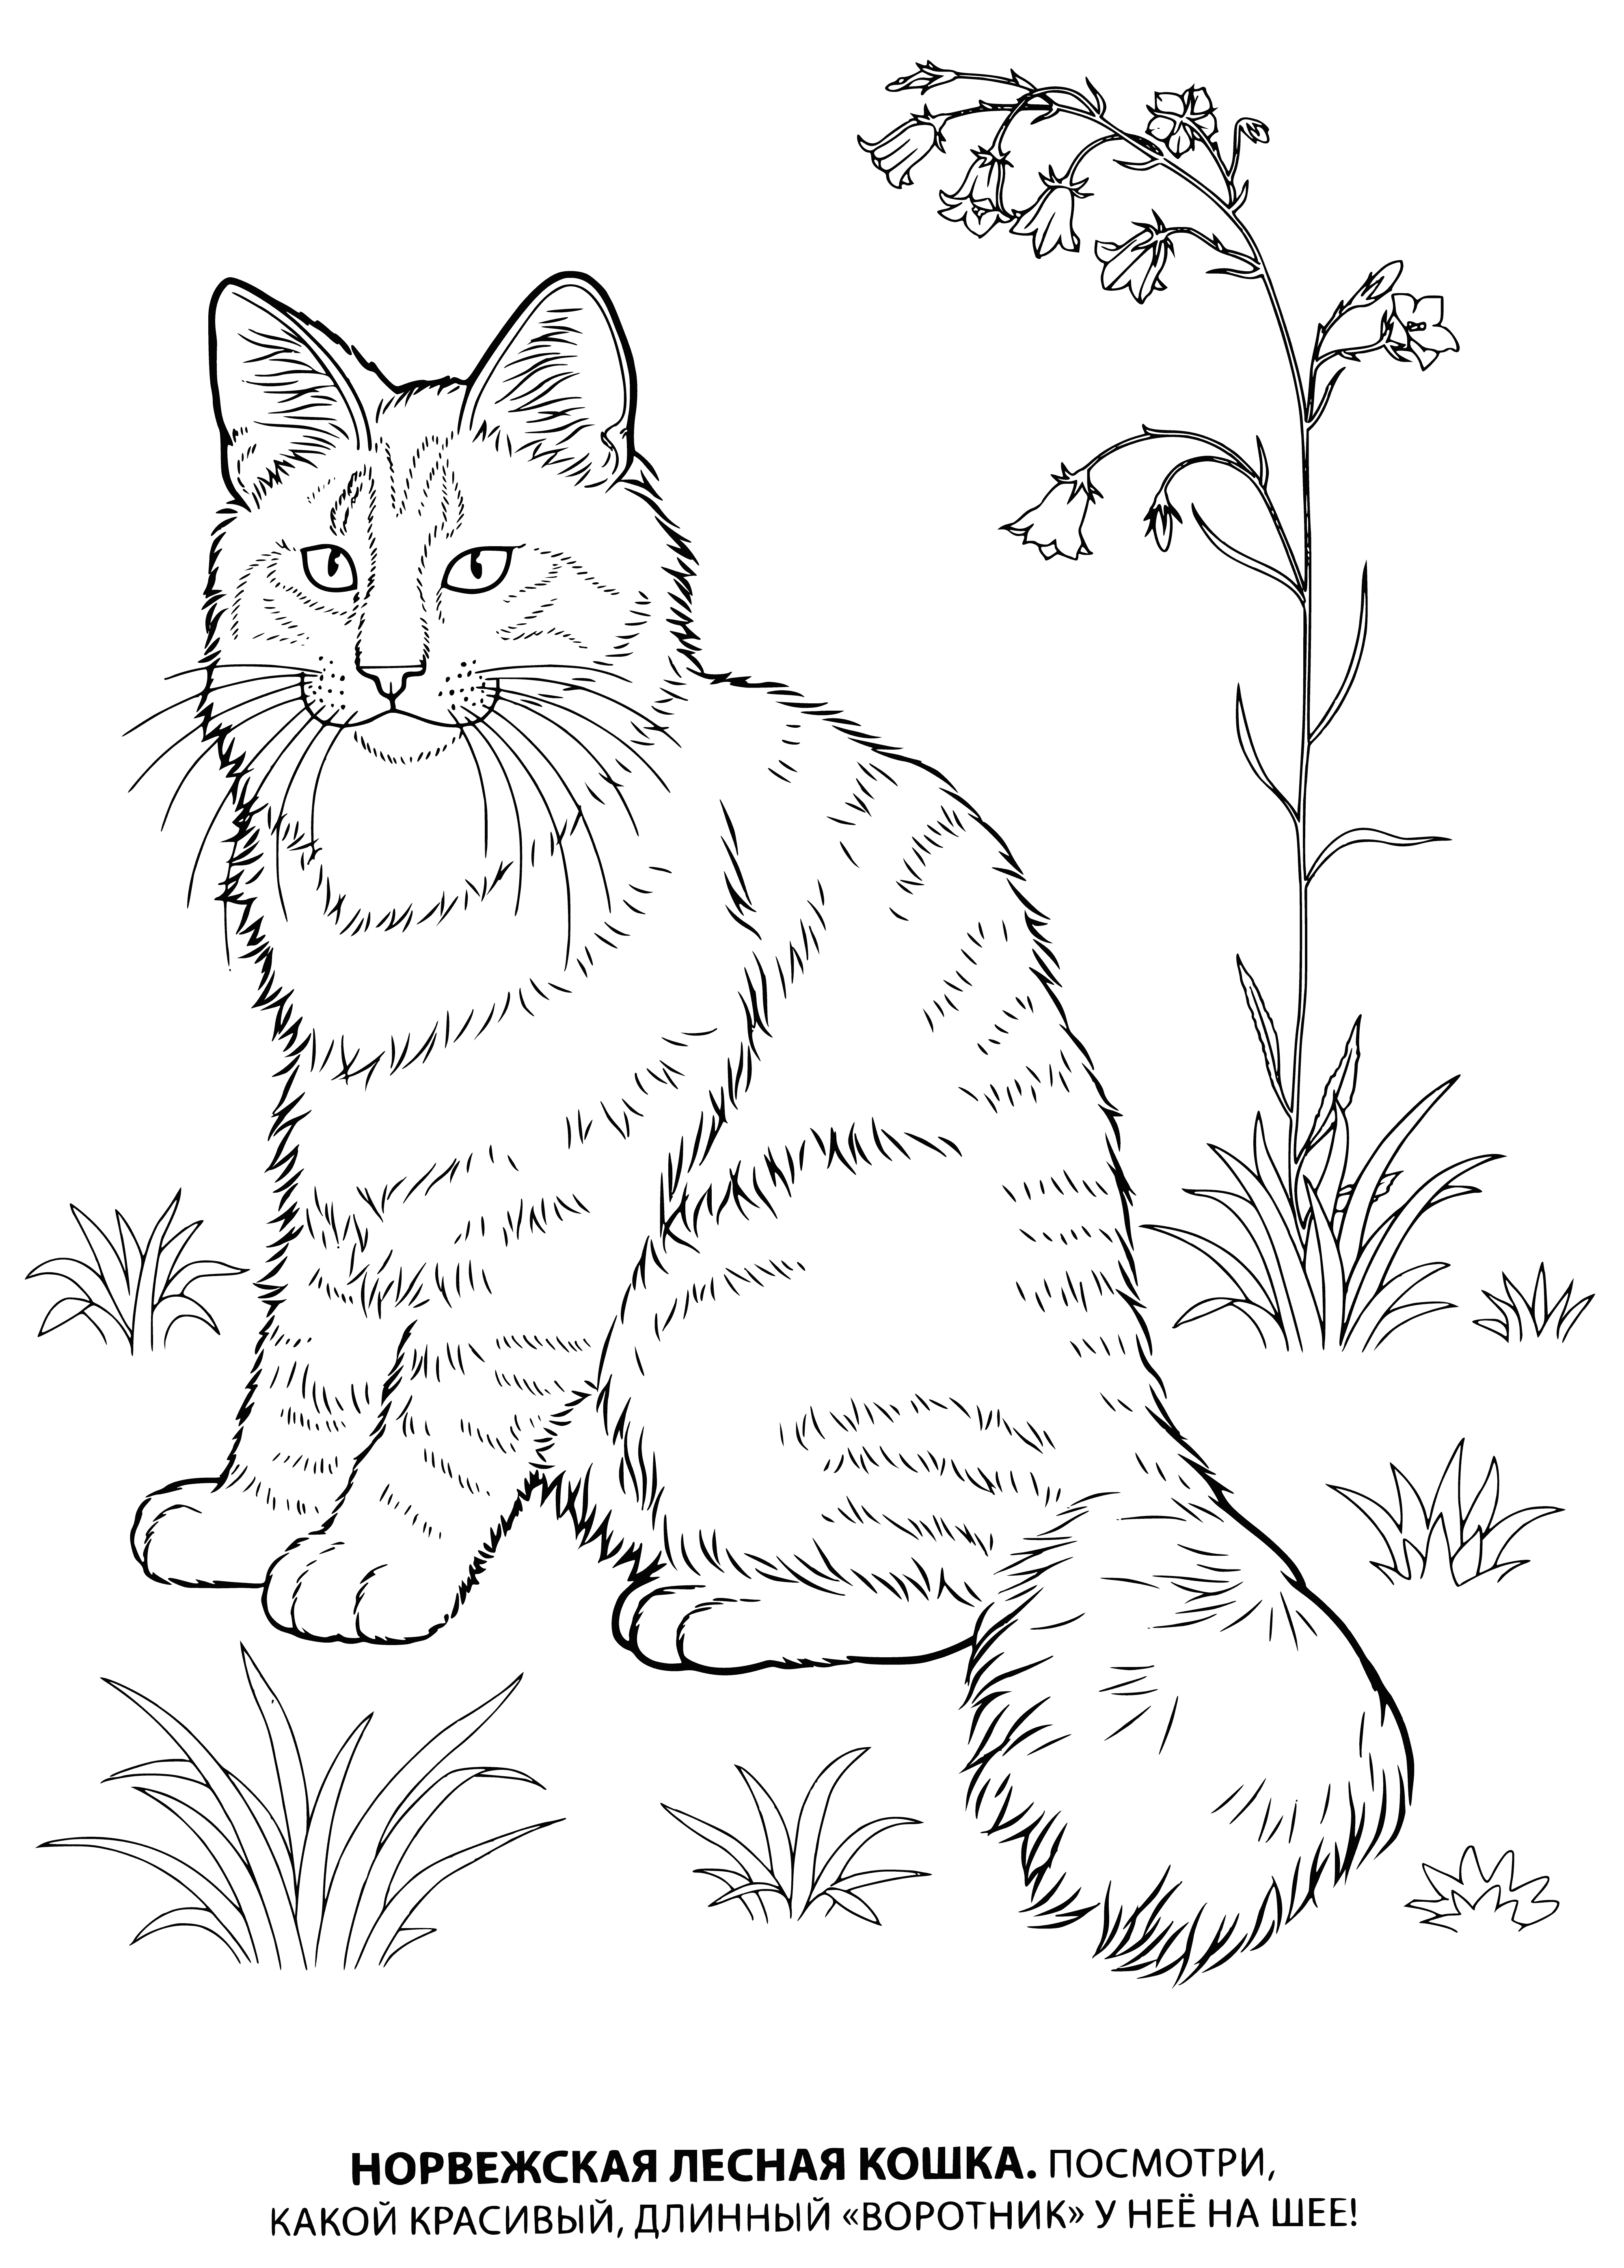 coloring page: Black cat with white paws, pointy ears and fluffy tail looks like it's from Norway.